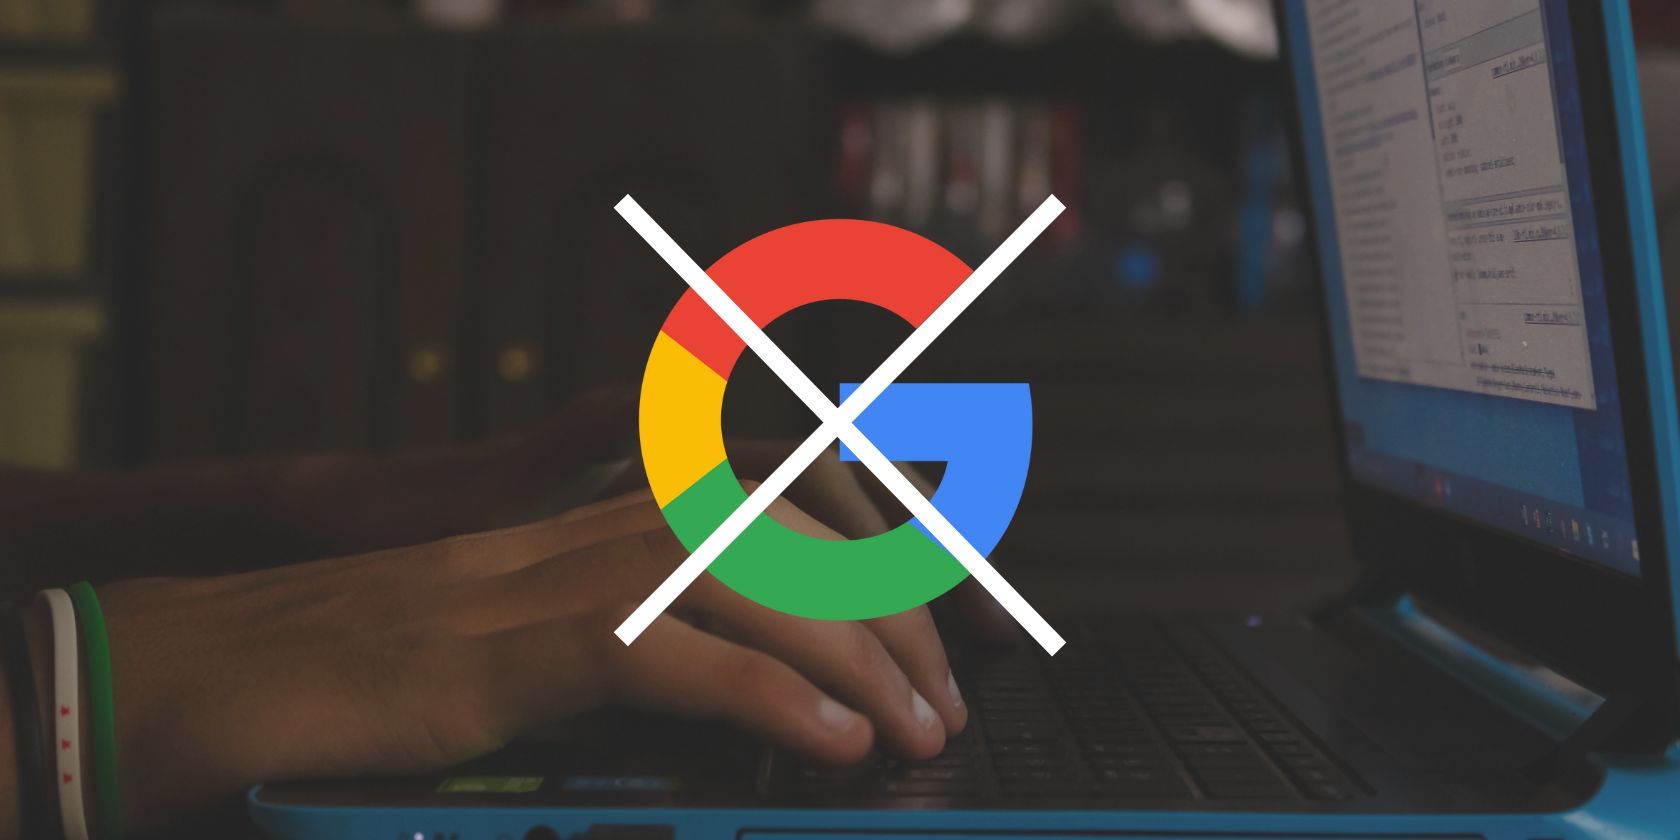 An image of the Google logo crossed out in with an image of a person typing on a laptop as the background